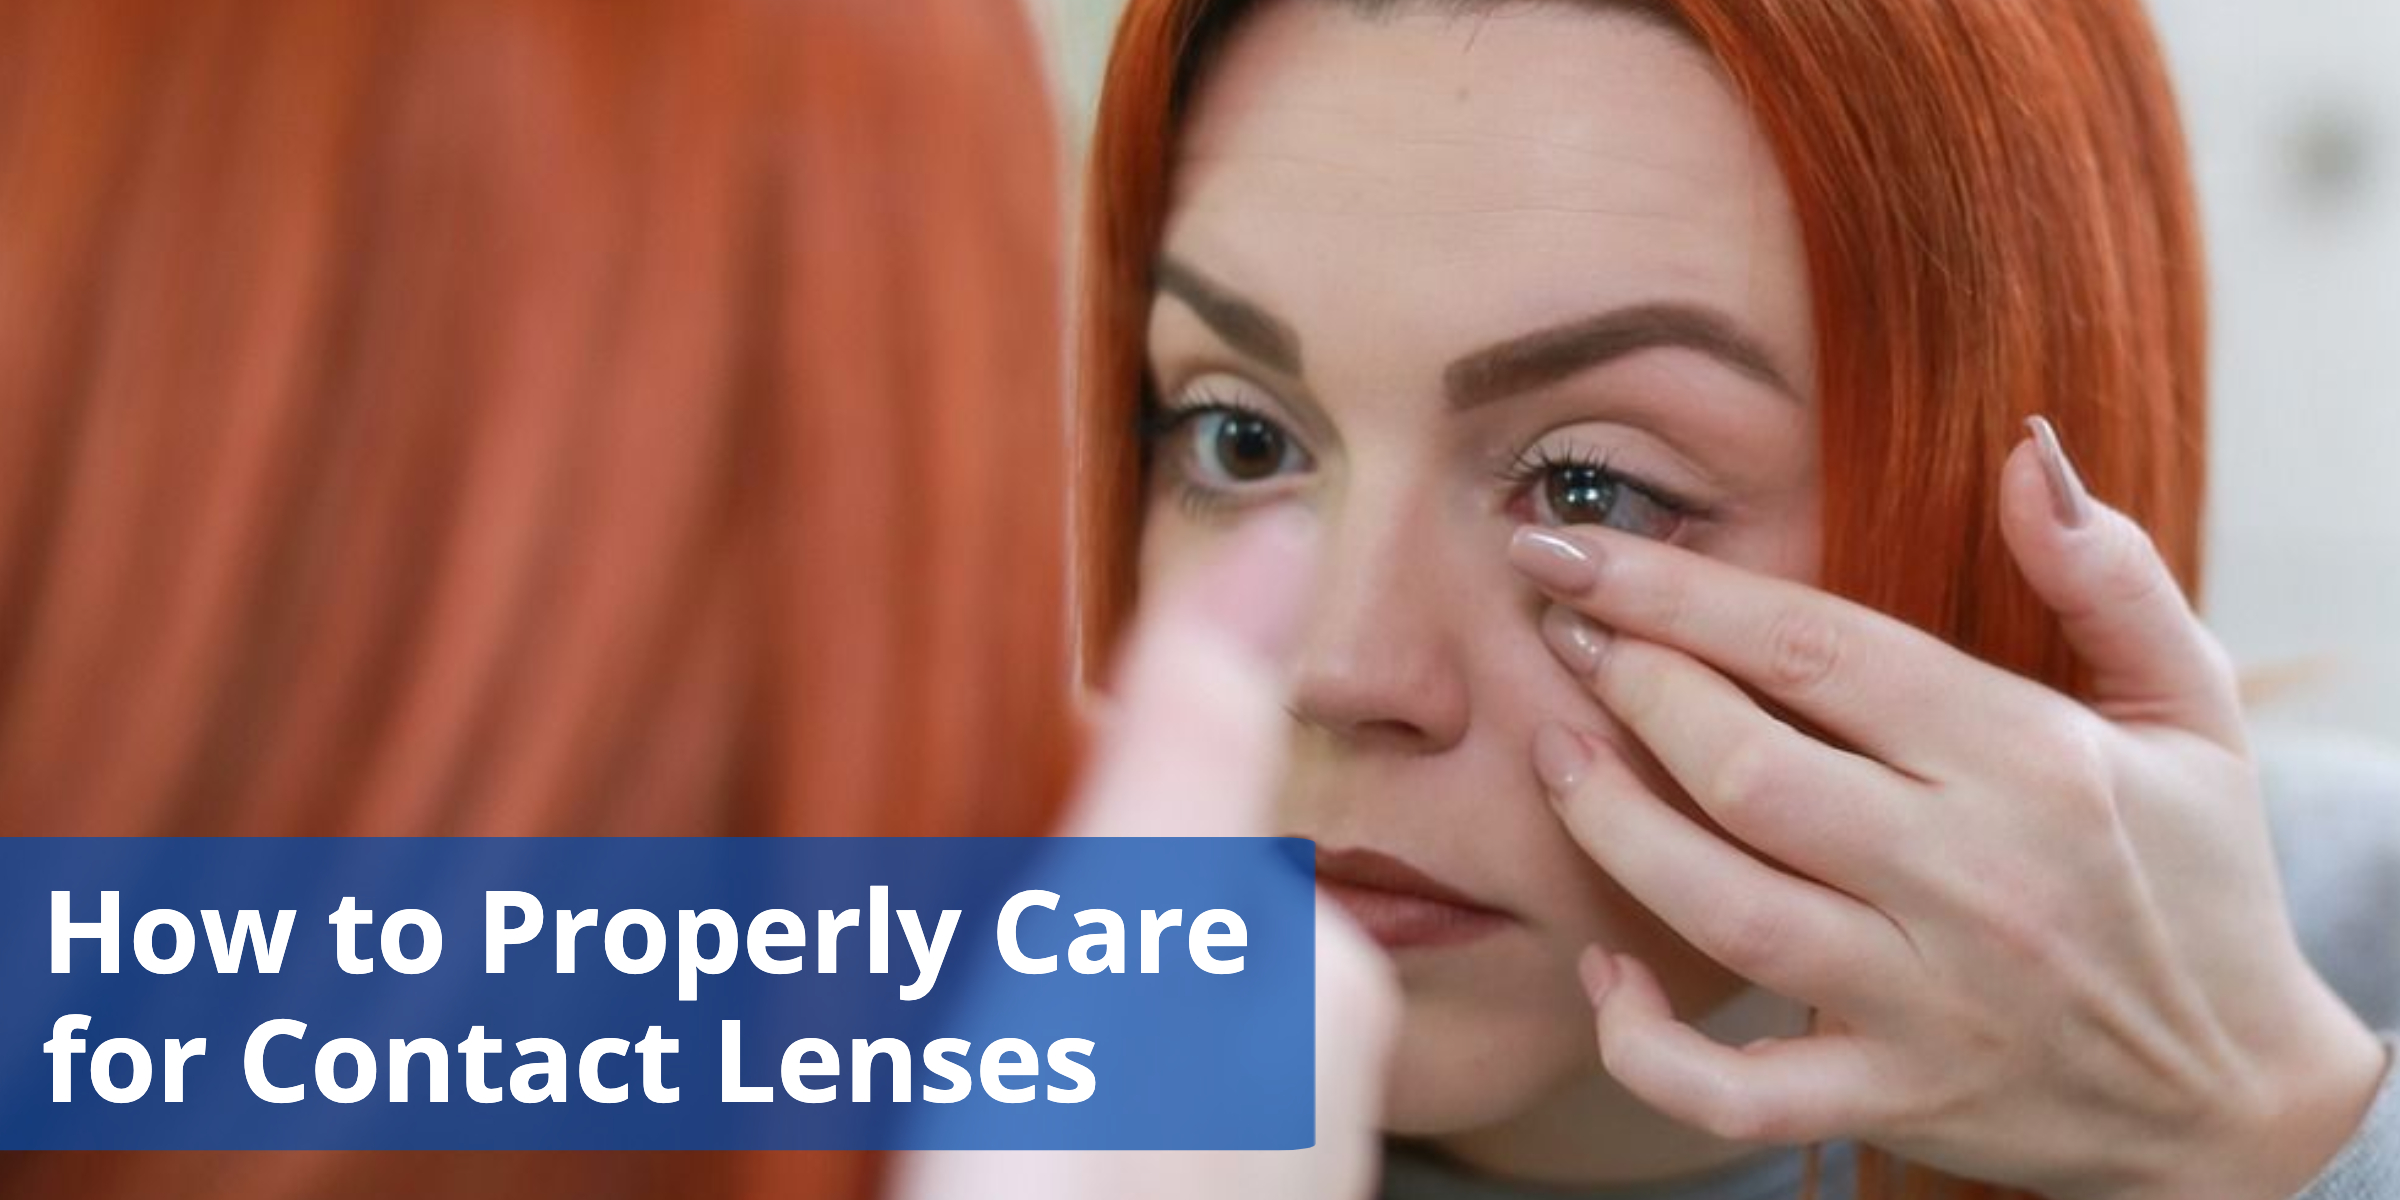 Caring for Contact Lenses